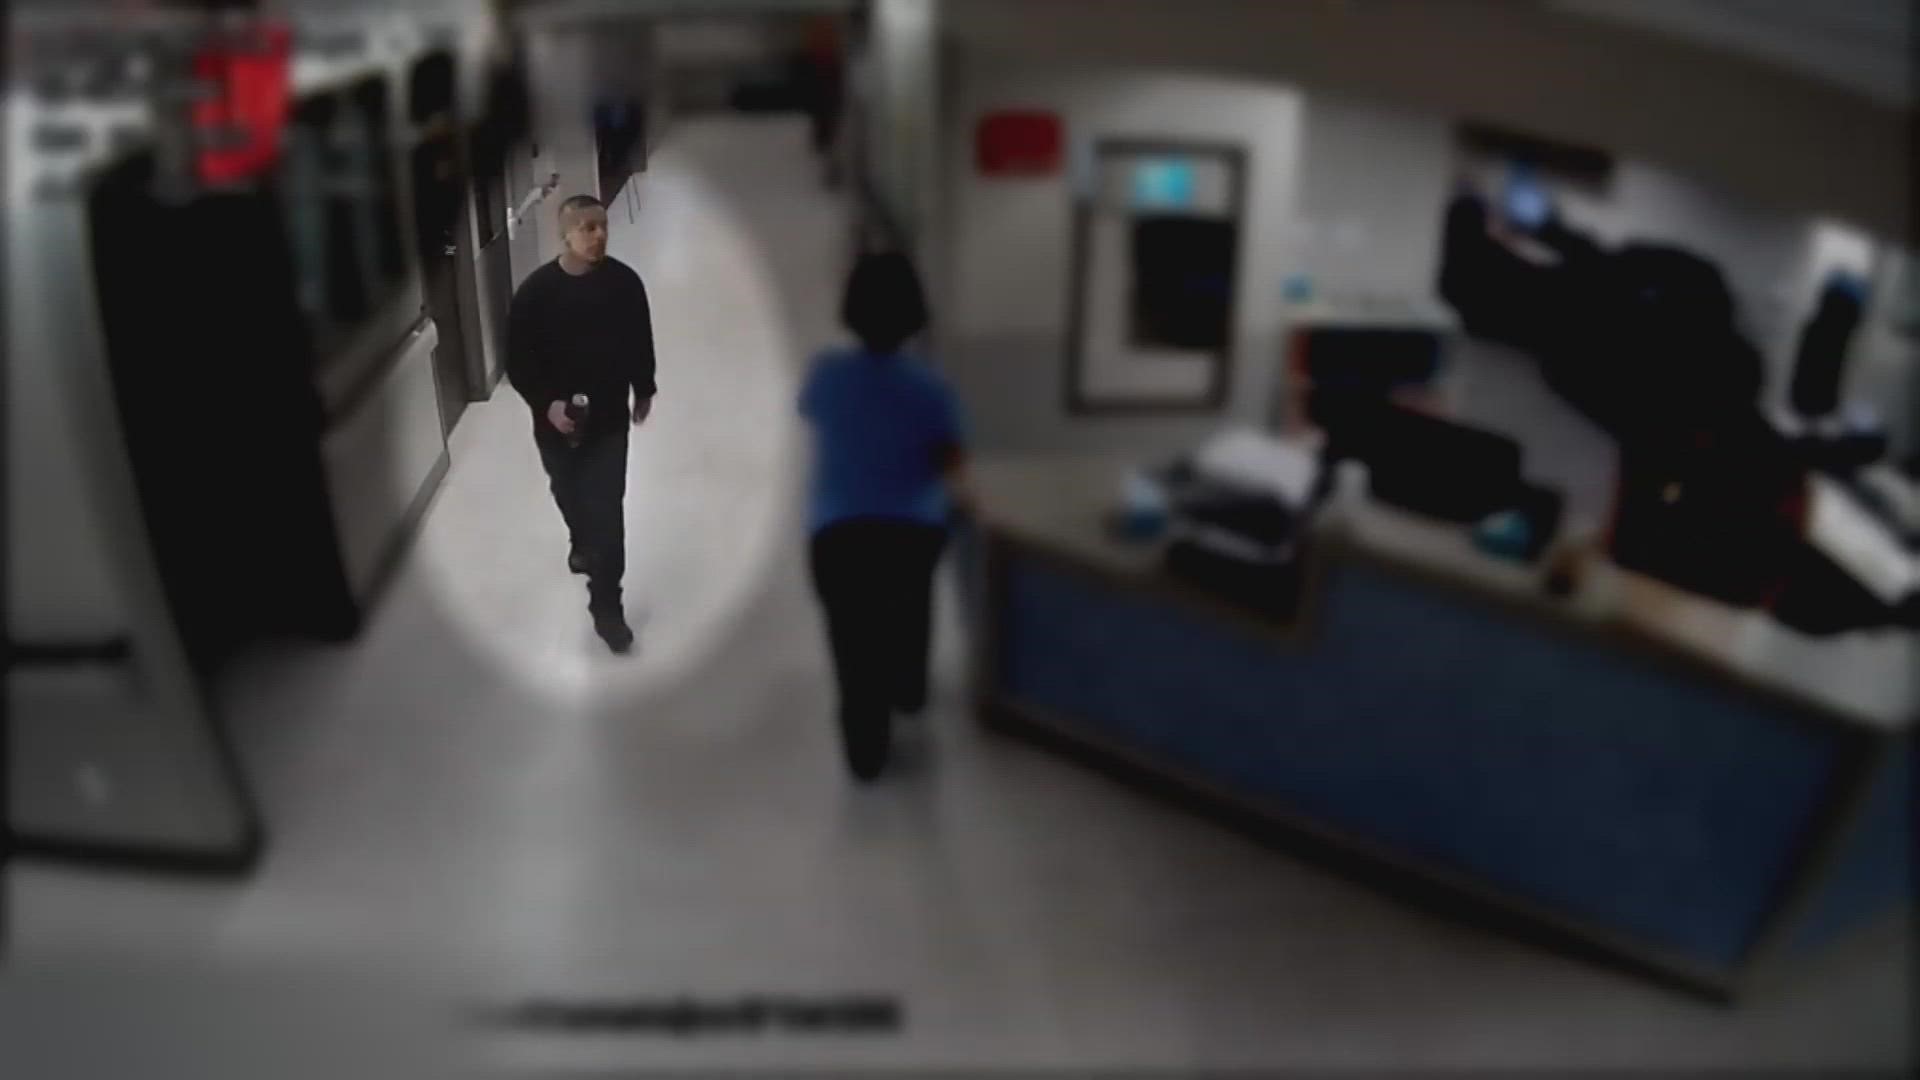 The video shows the hallway of Methodist Hospital in Dallas as police responded to the fatal shooting of two employees.